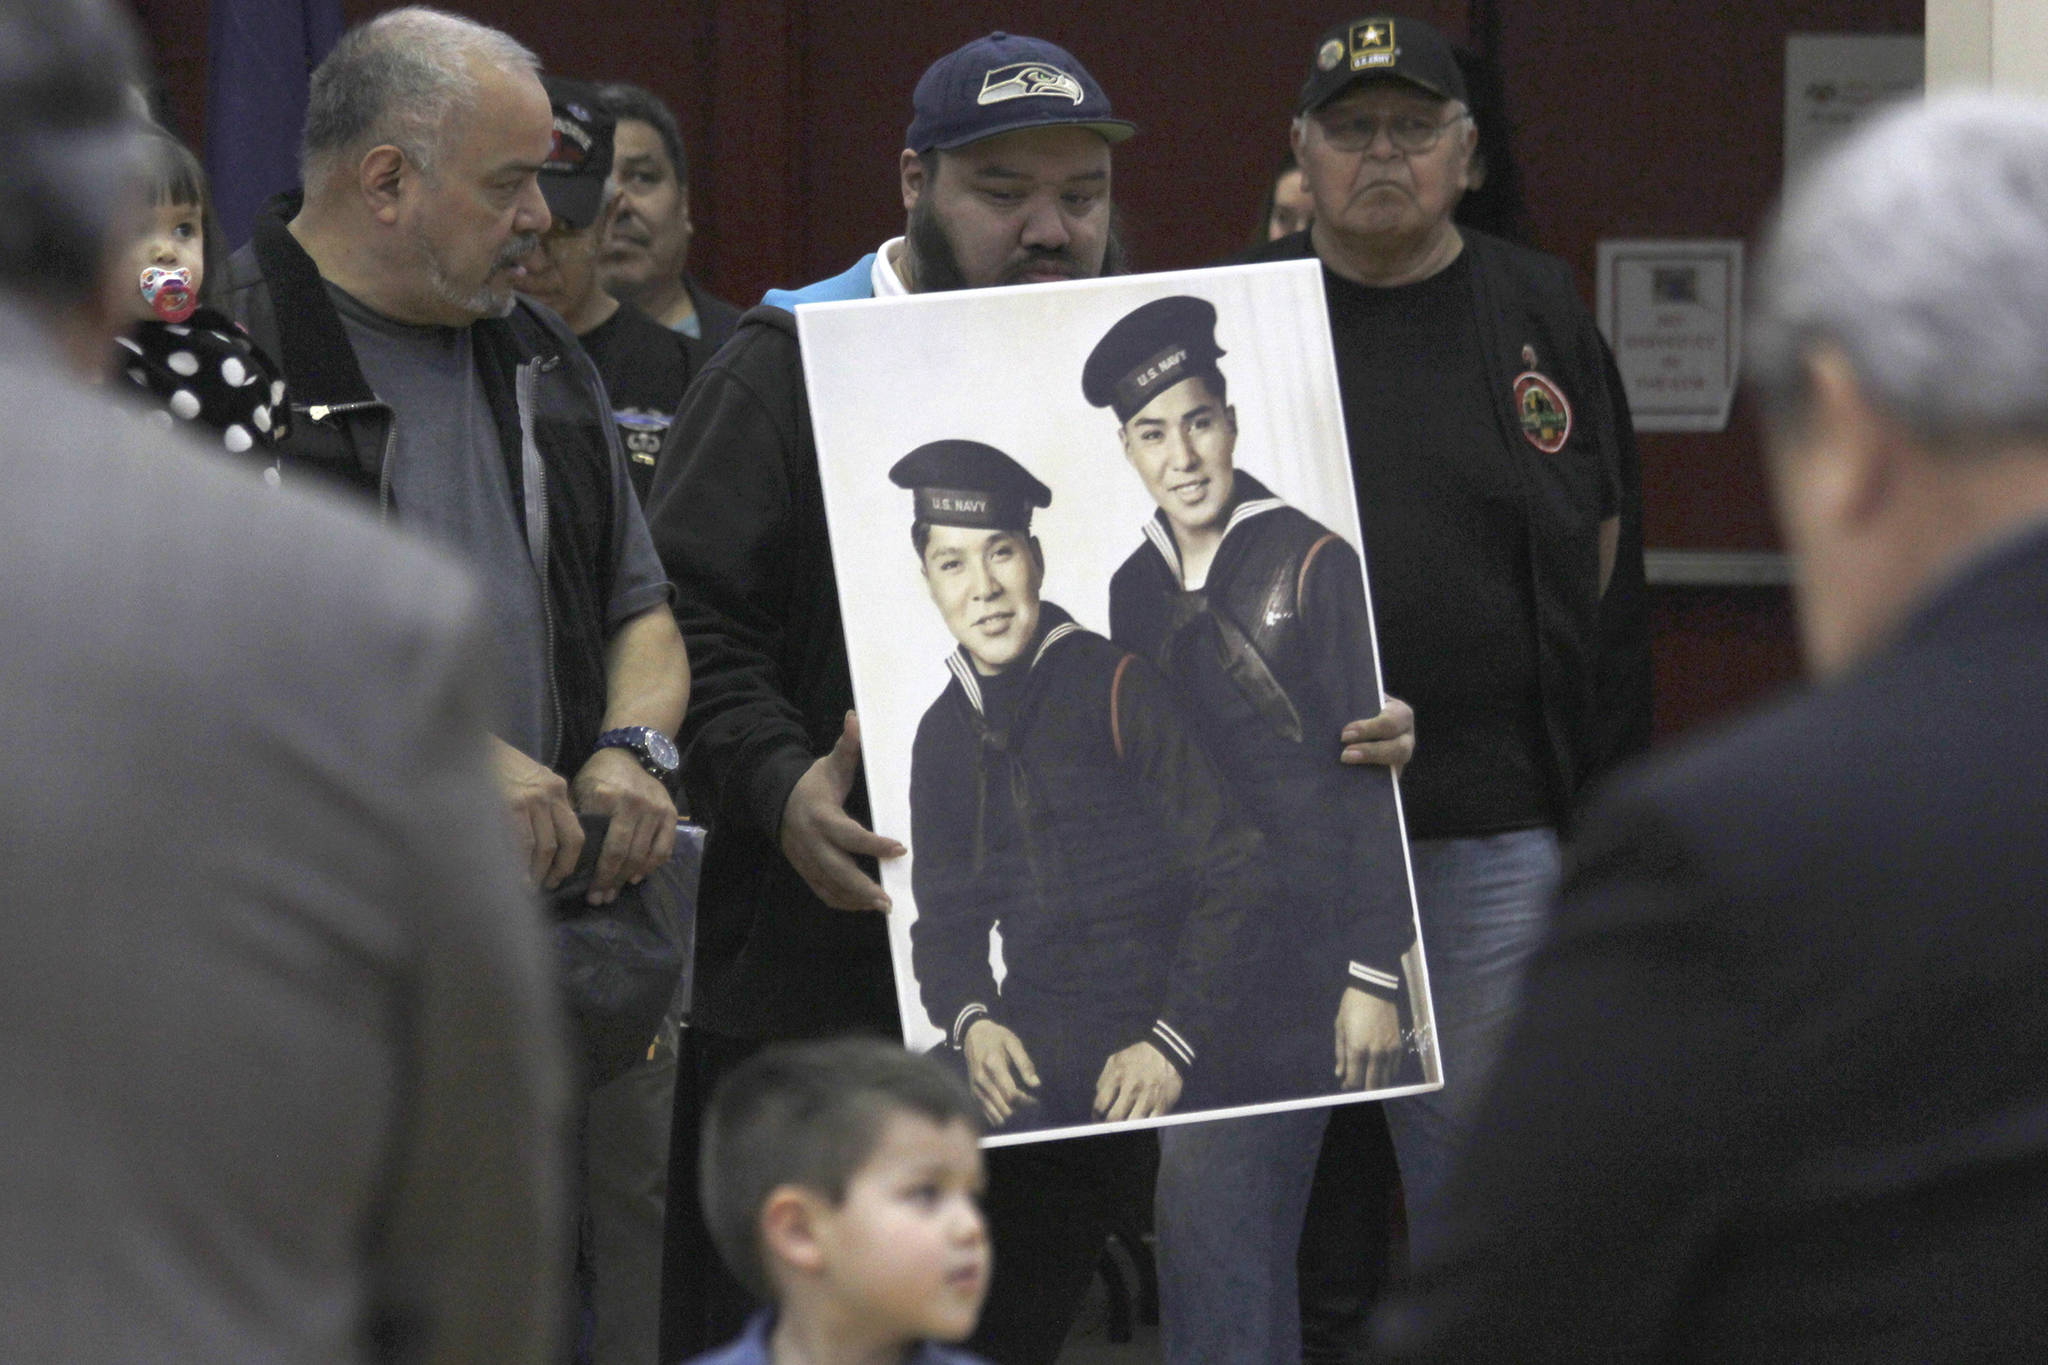 Family members of brothers Mark and Harvey Jacobs hold a picture of the brothers during a ceremony honoring Tlingit code talkers on Monday, March 18, 2019. (Alex McCarthy | Juneau Empire)